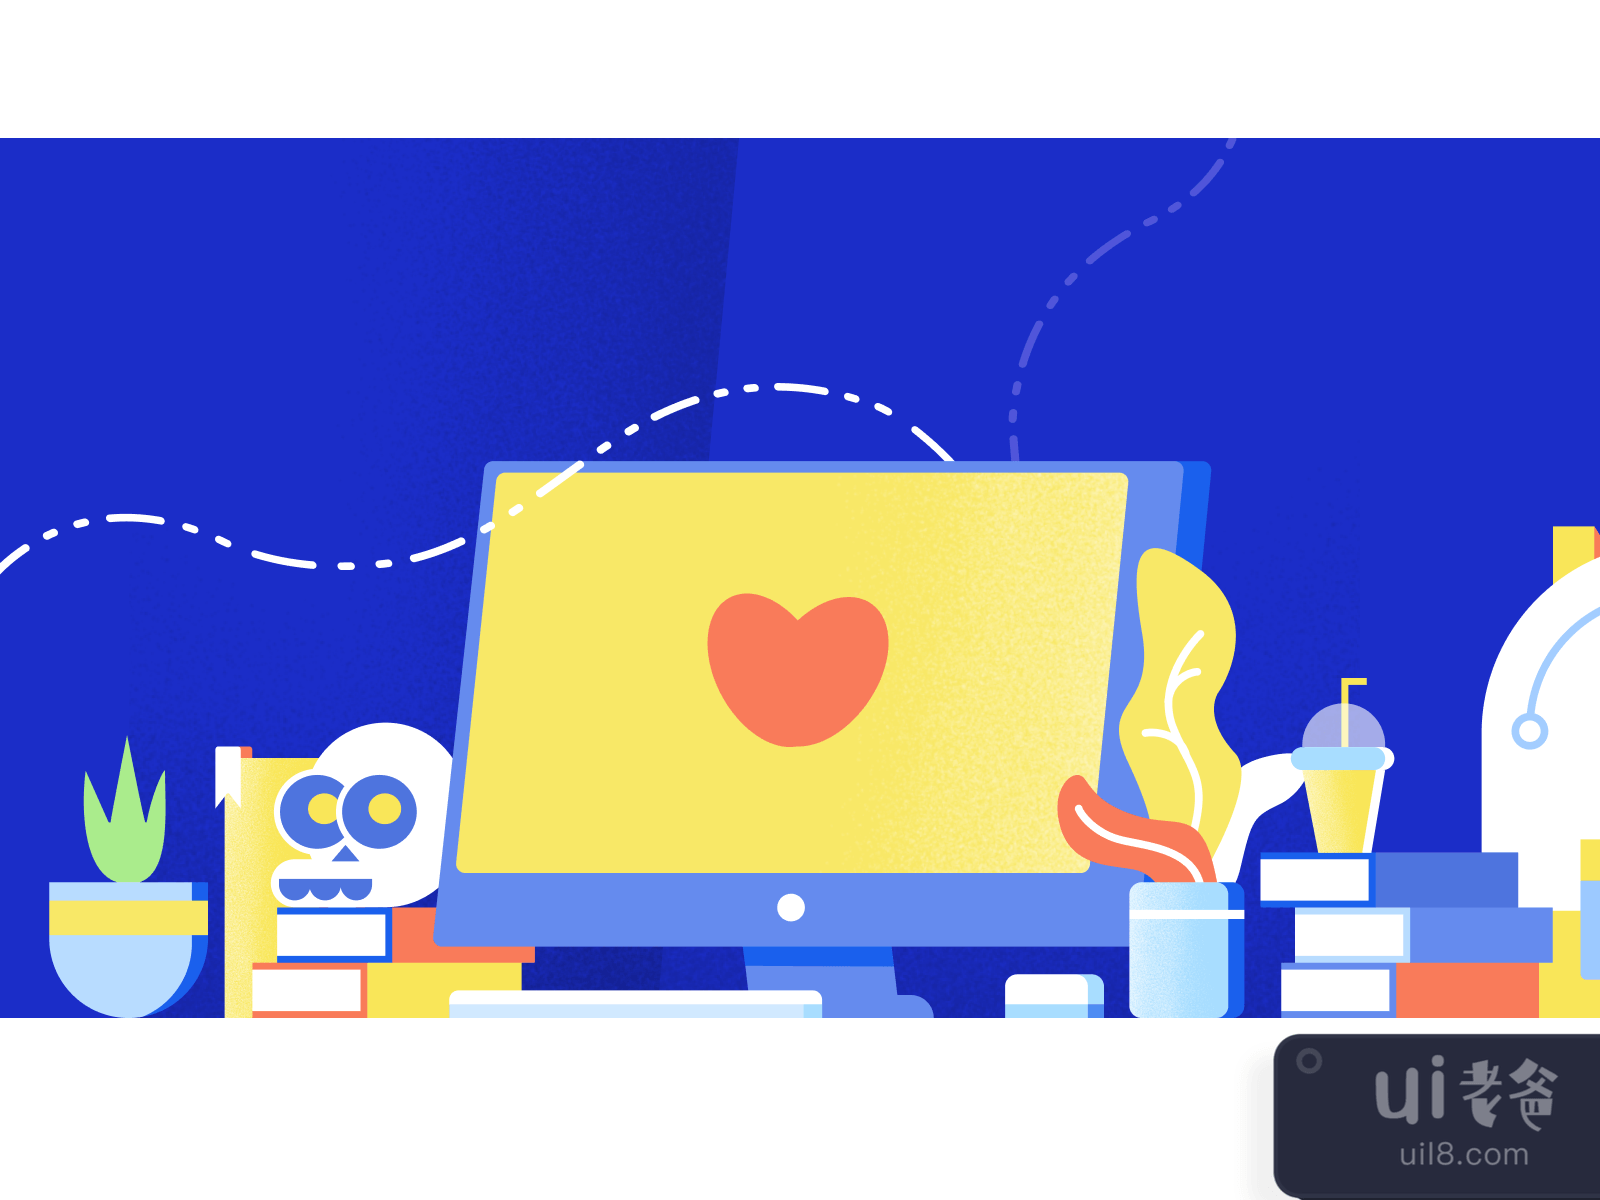 Computer Love Illustration for Figma and Adobe XD No 4